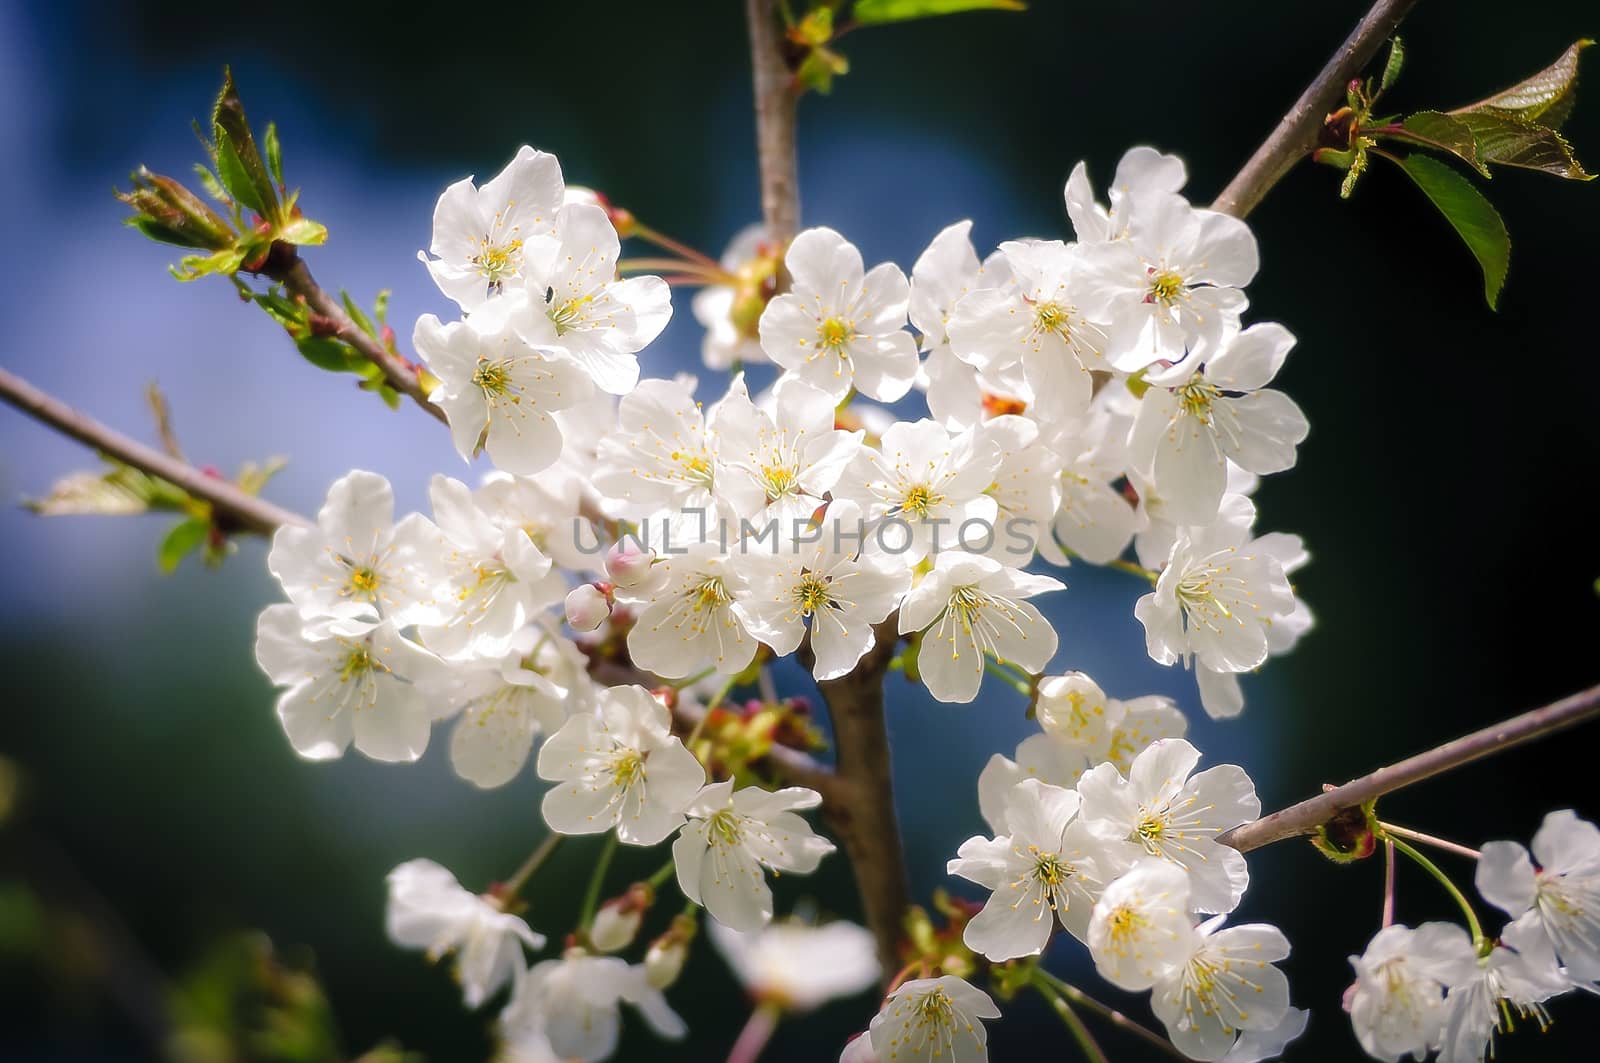 Closeup photo of a blooming apple tree, dark background for contrast